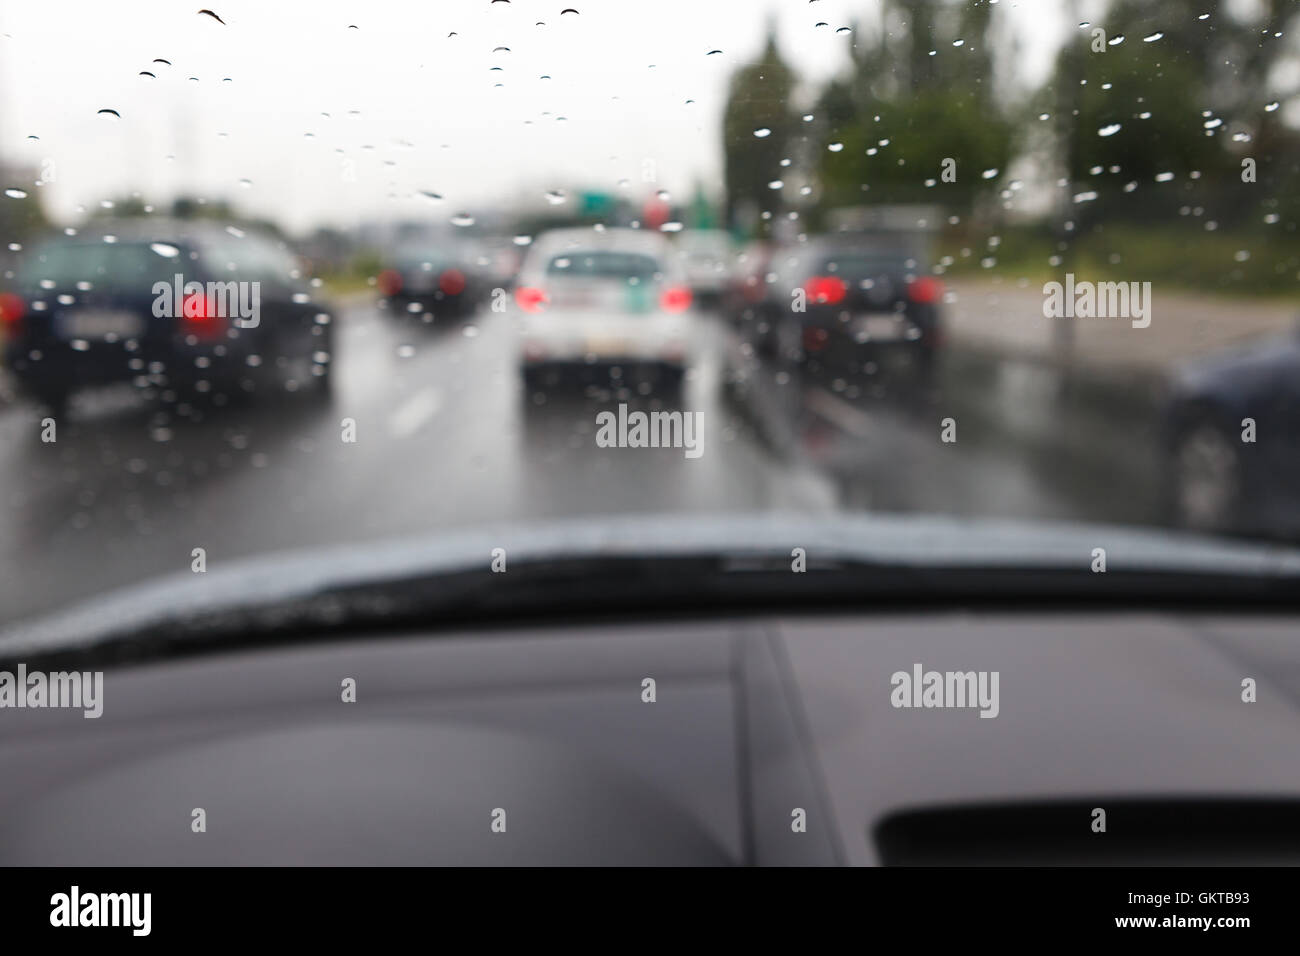 Bad weather conditions driving a car in traffic jam - blurred view Stock Photo